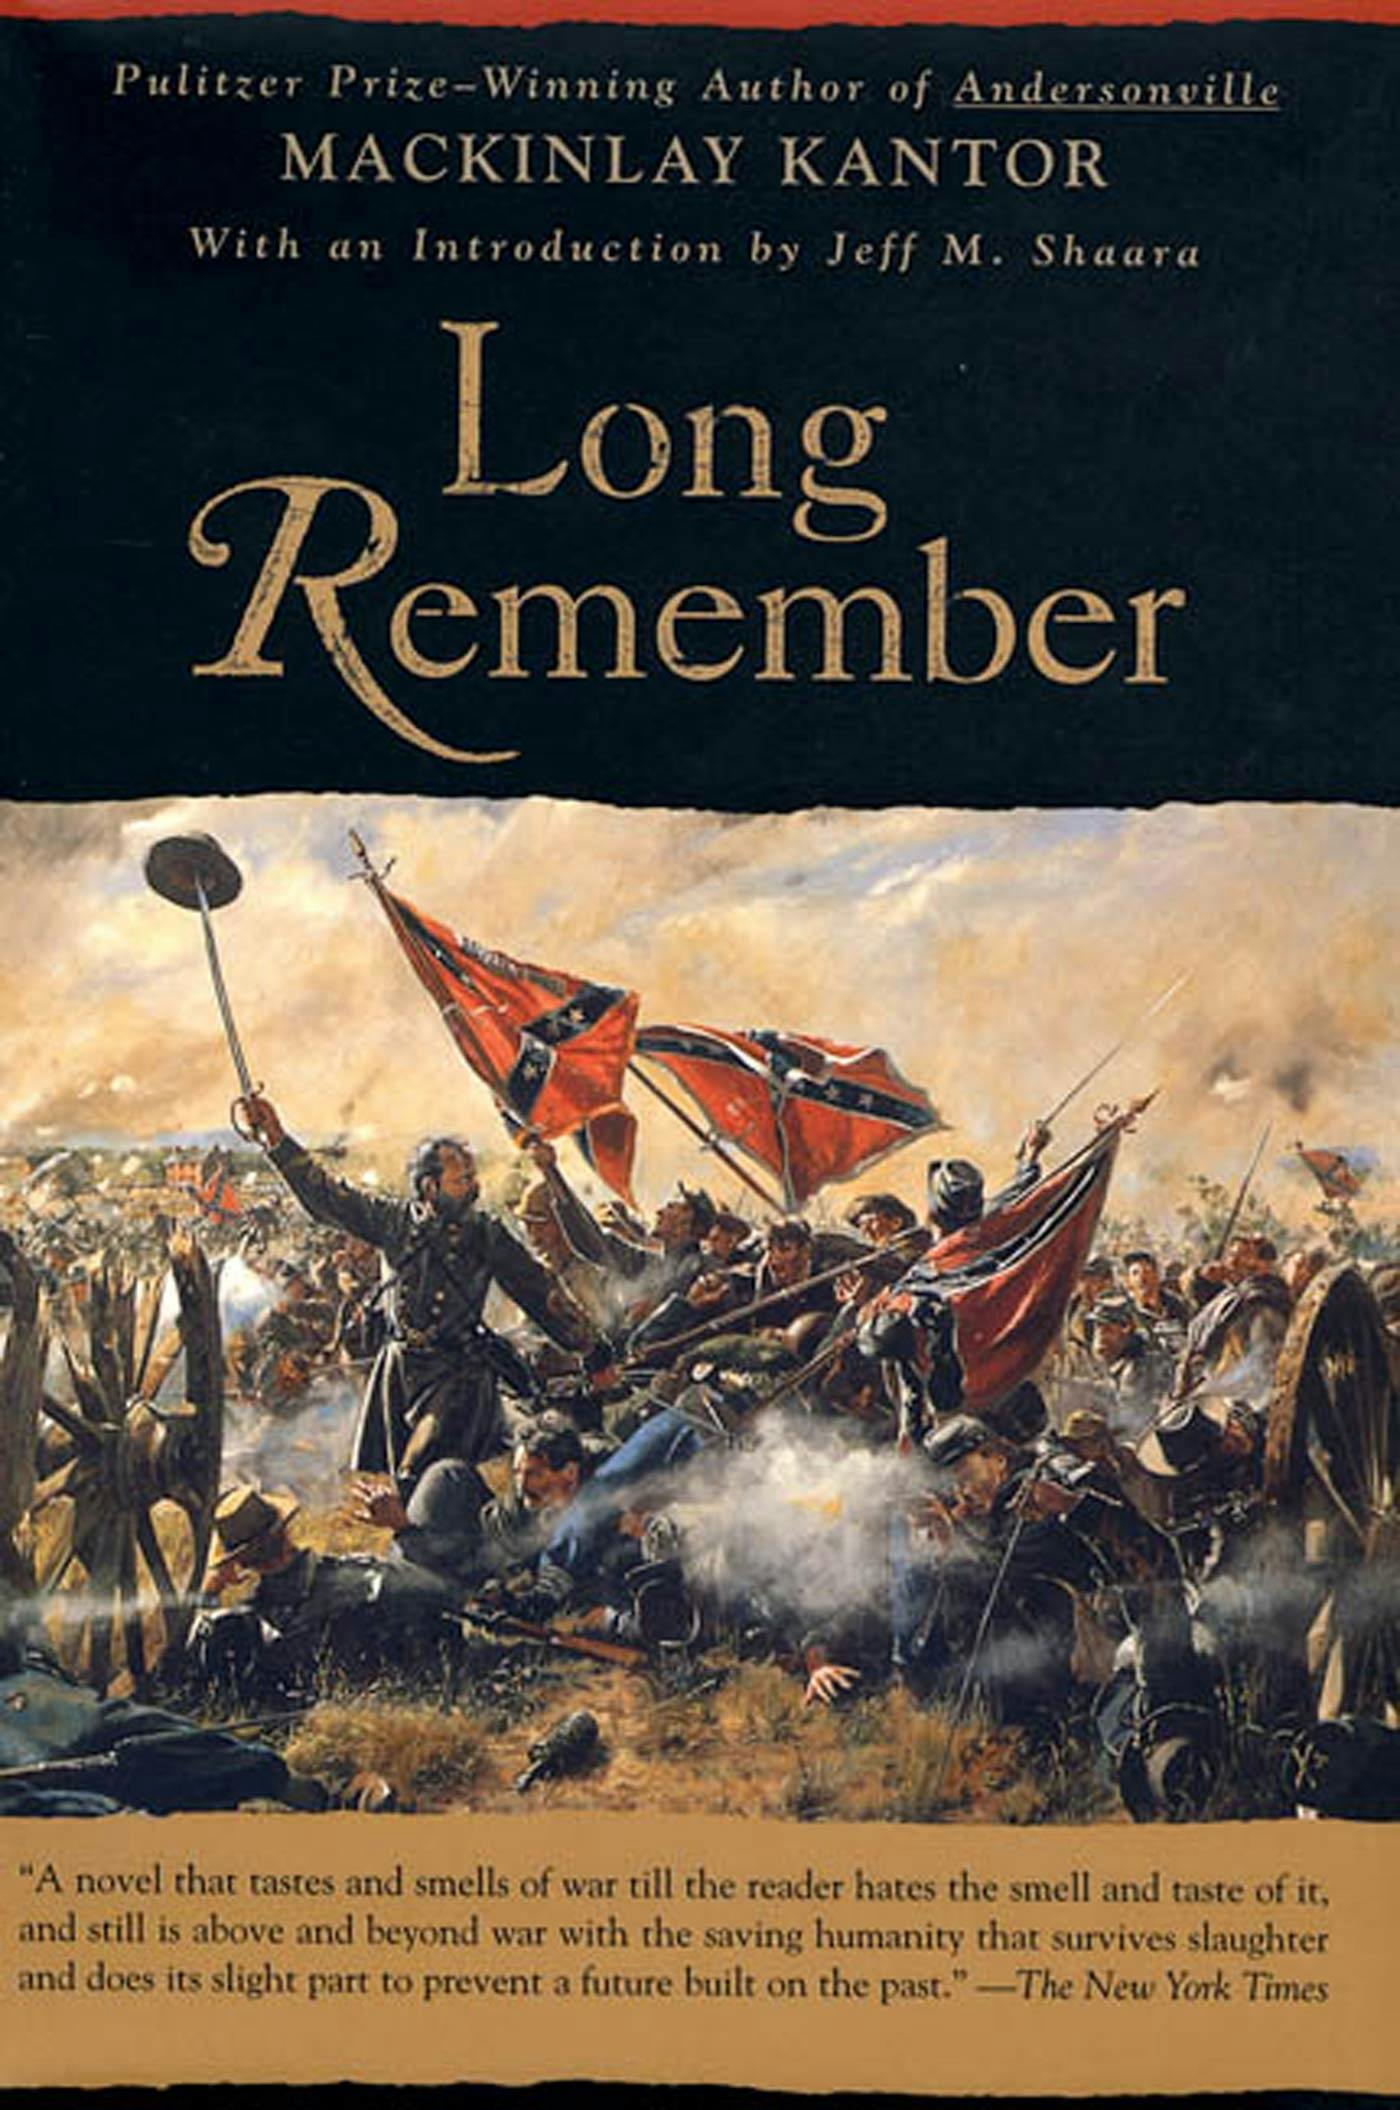 Cover for the book titled as: Long Remember